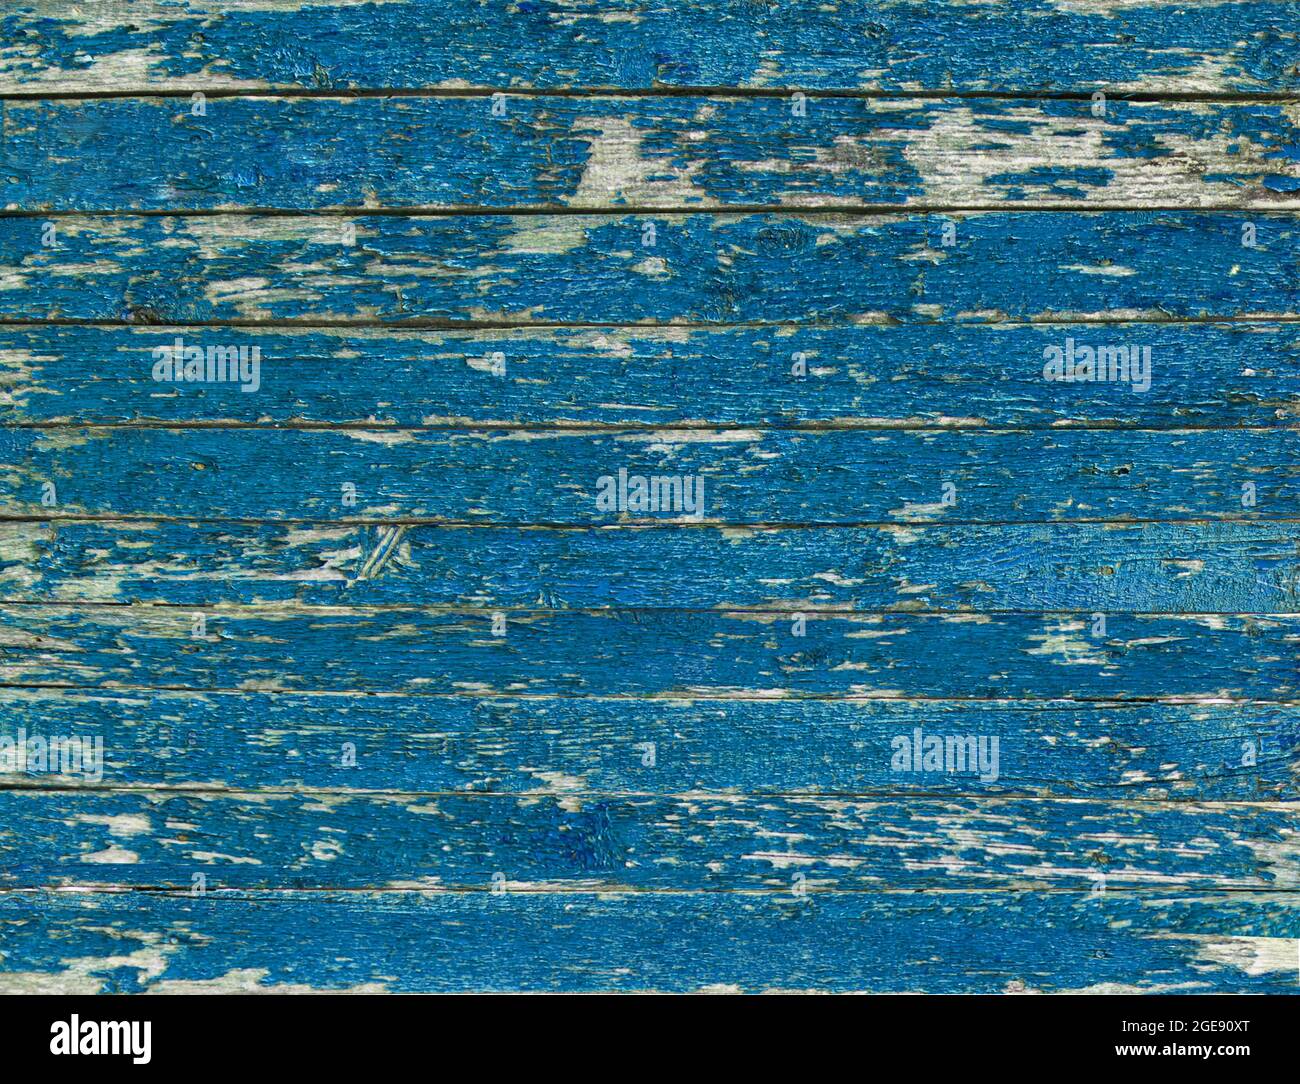 Color-Peel wood texture. Old wooden painted light blue rustic fence, paint peeling background Stock Photo